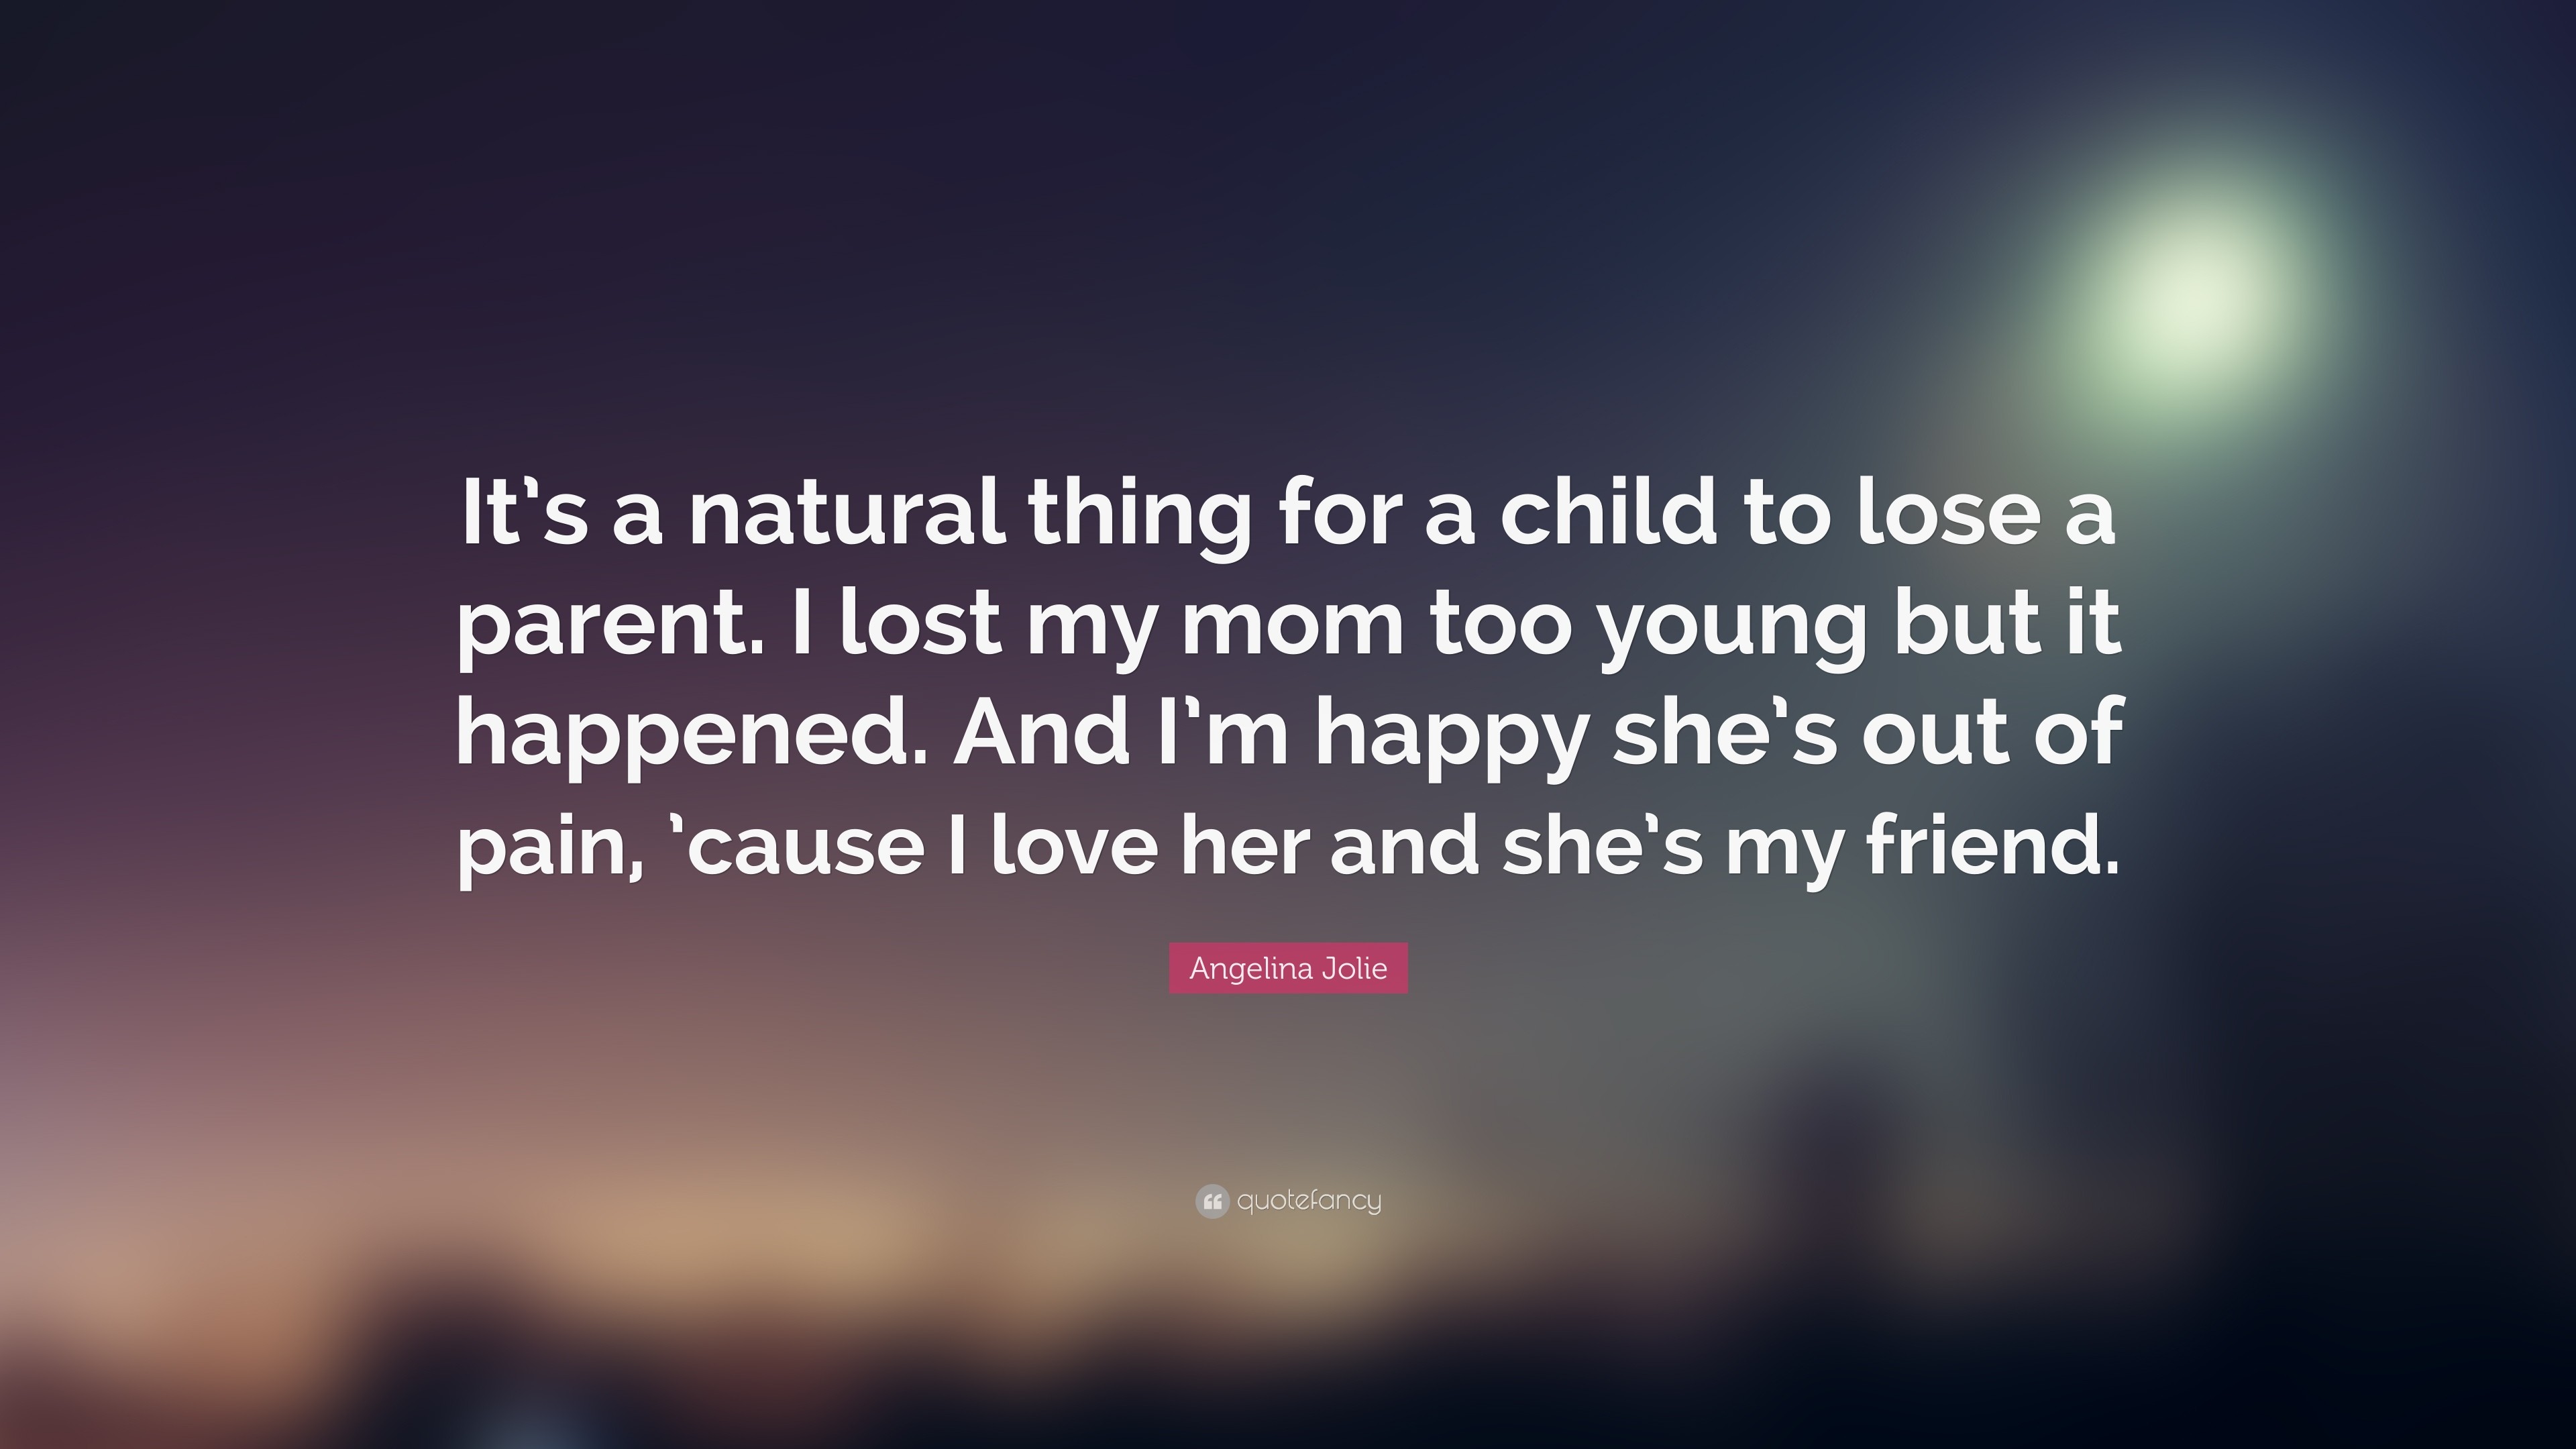 3840x2160 Angelina Jolie Quote: “It's a natural thing for a child to lose a parent